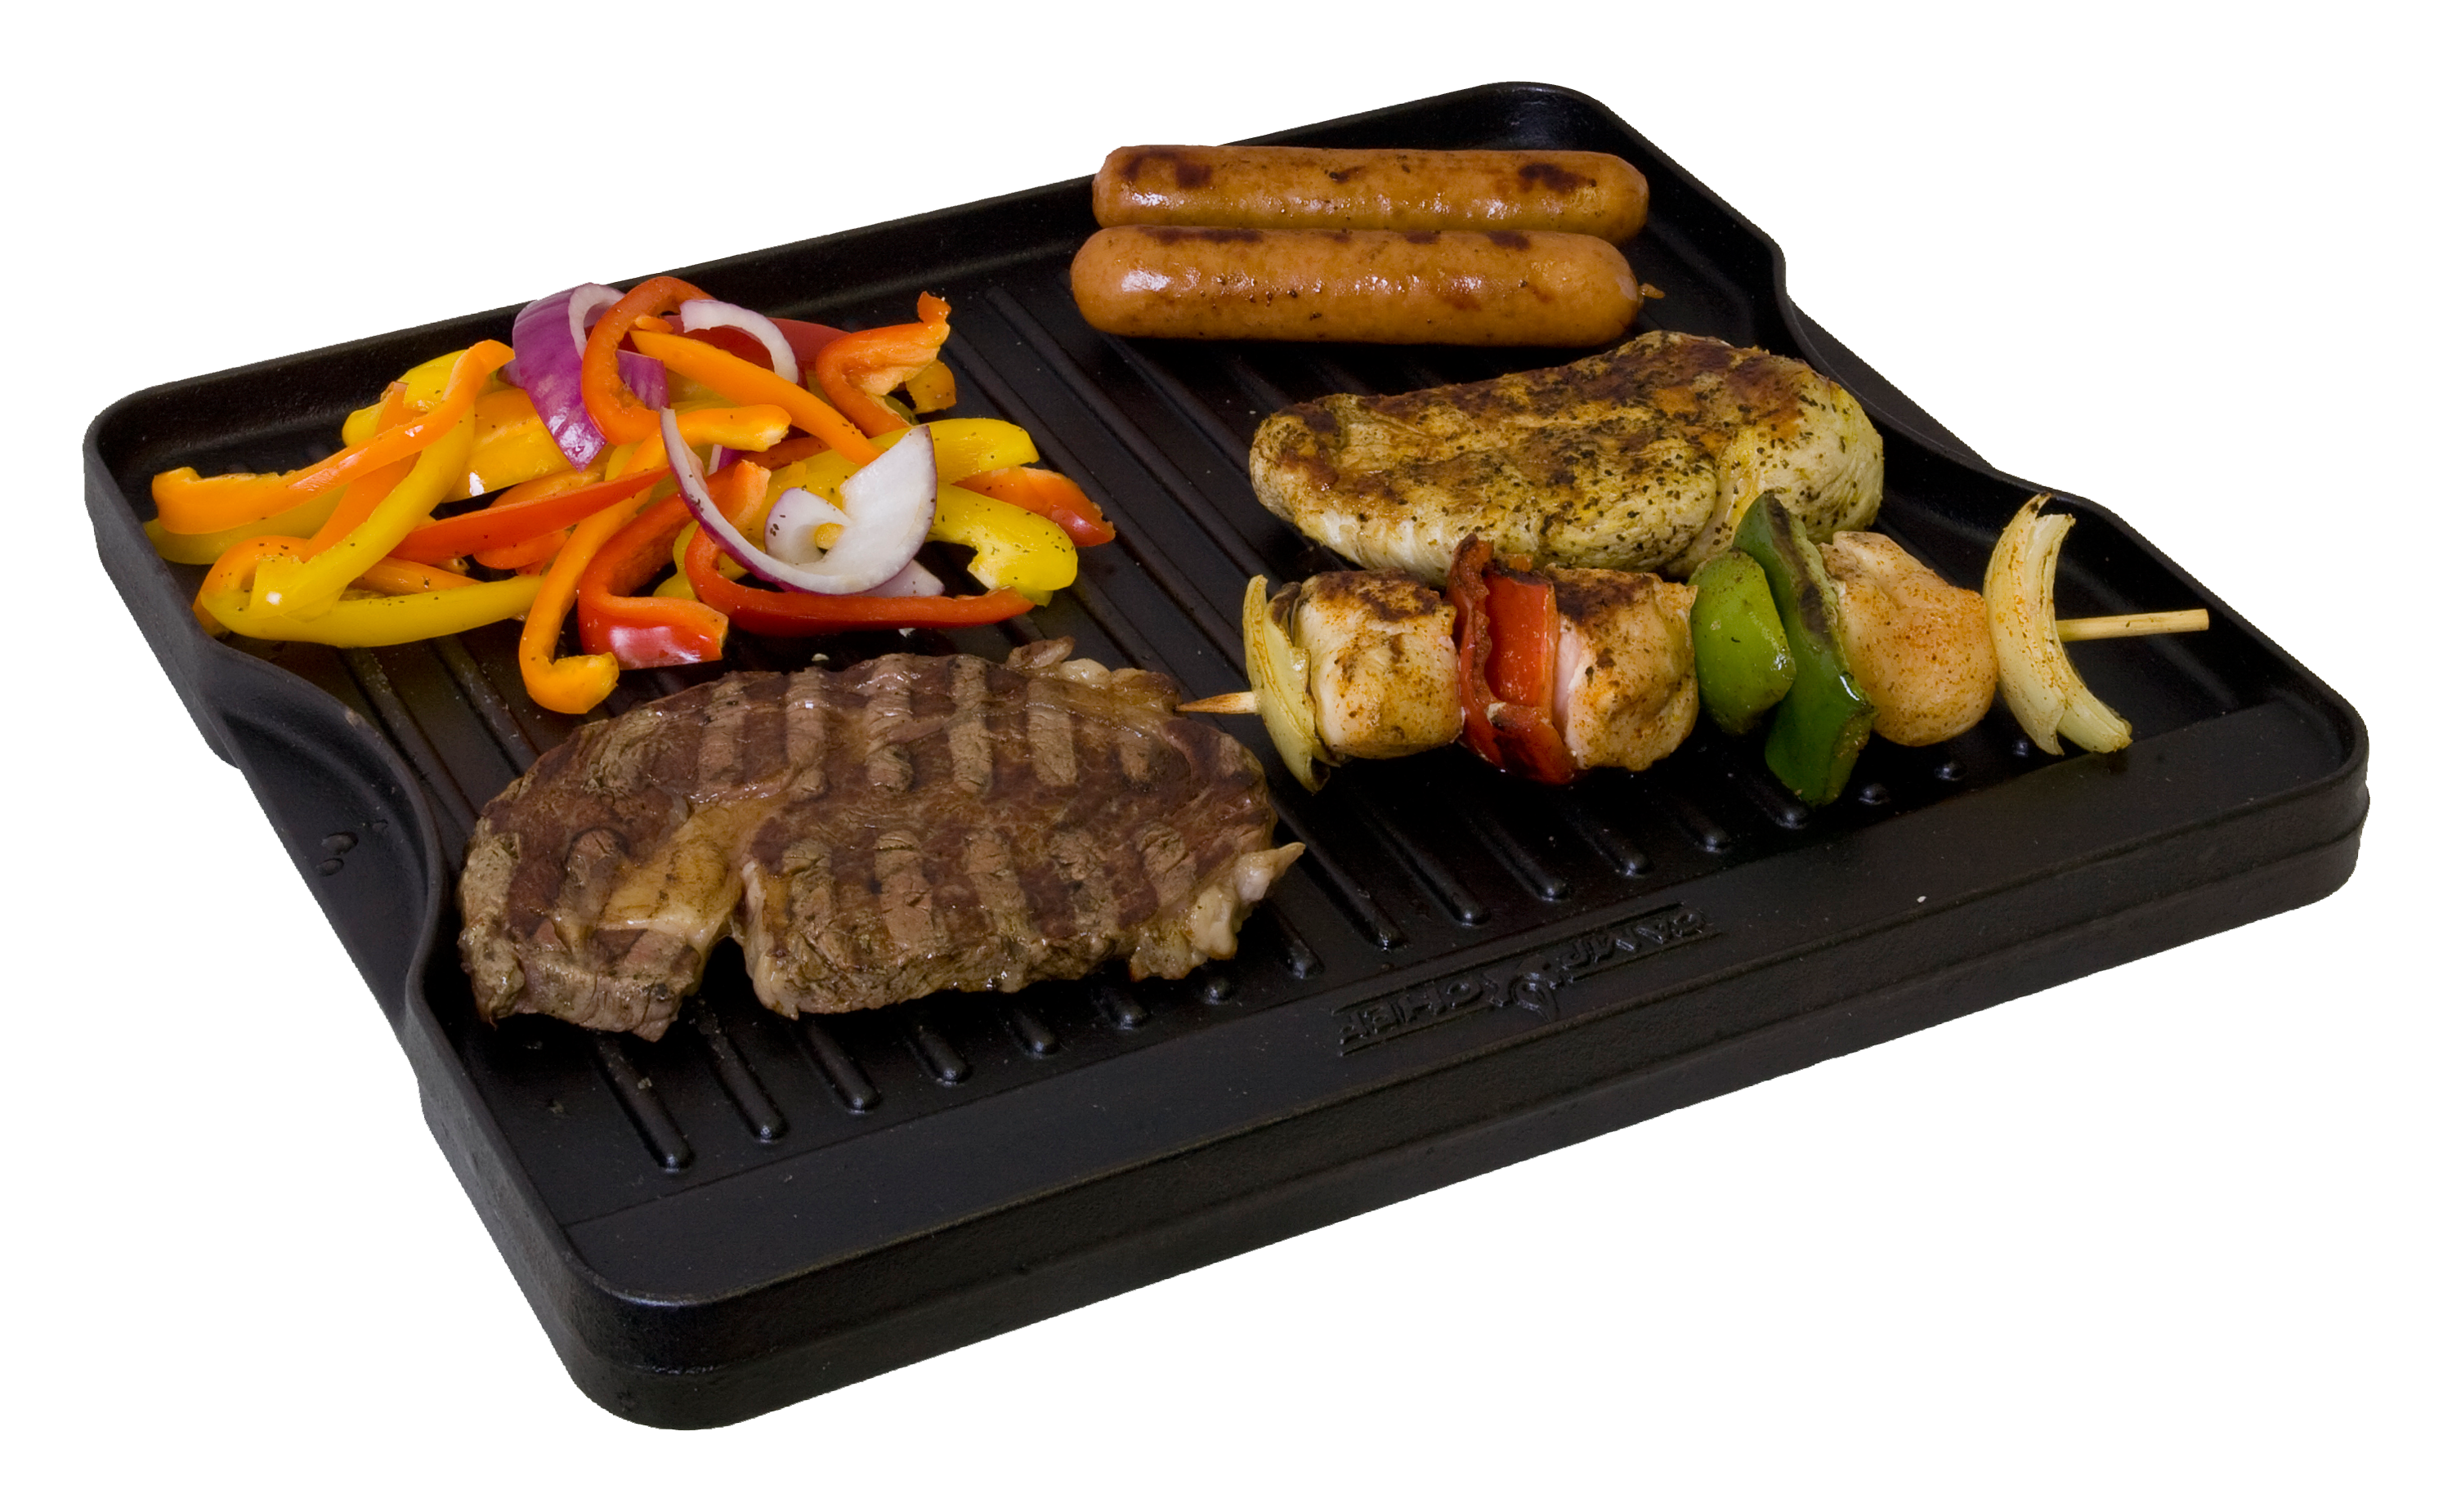 Camp Chef Reversible Cast Iron Grill and Griddle